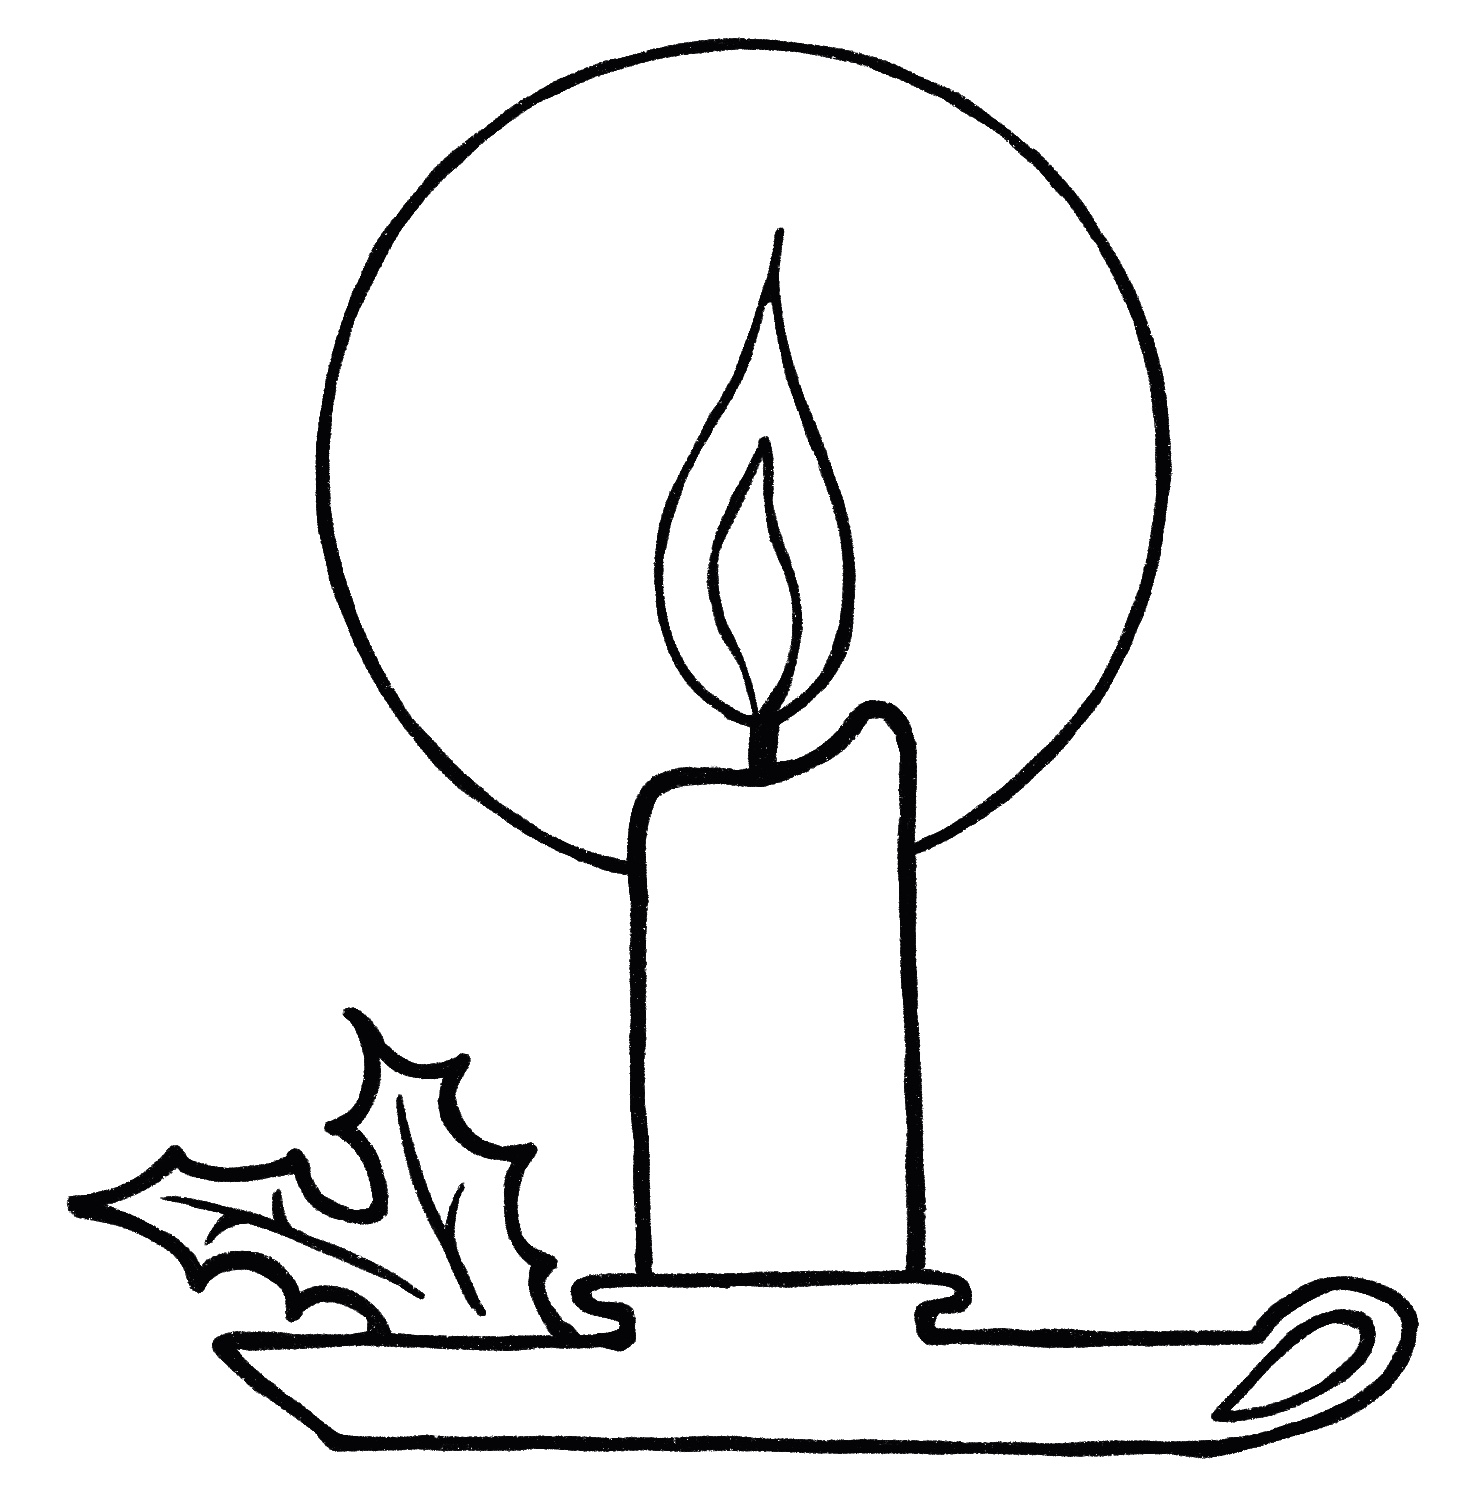 926 Candle Holder Sketch Images Stock Photos  Vectors  Shutterstock